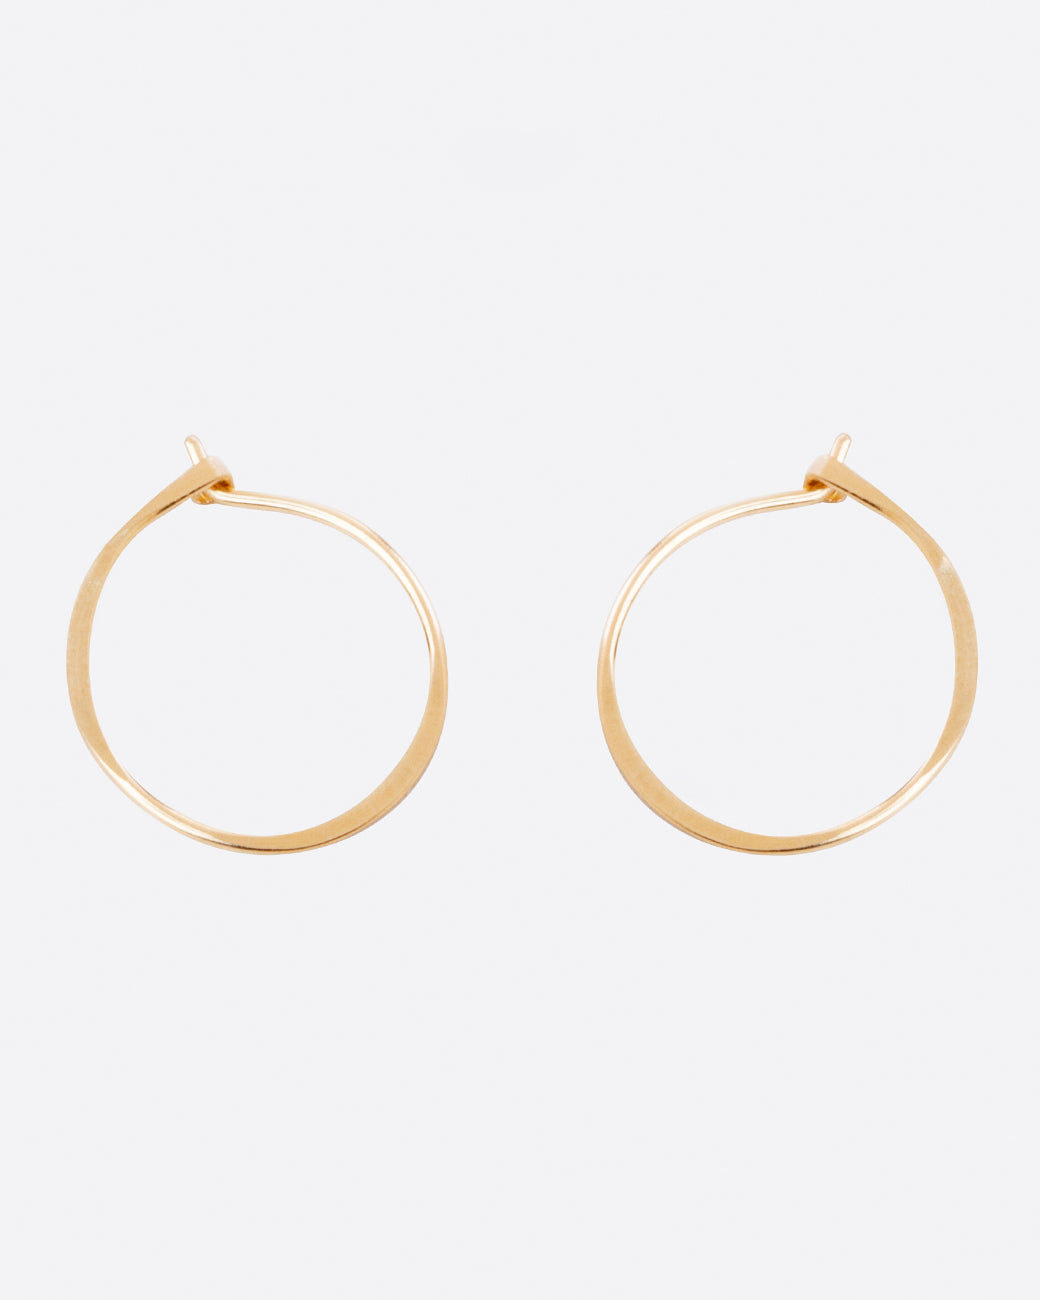 Fairmined gold, hand-hammered round hoop earrings that close upon themselves.